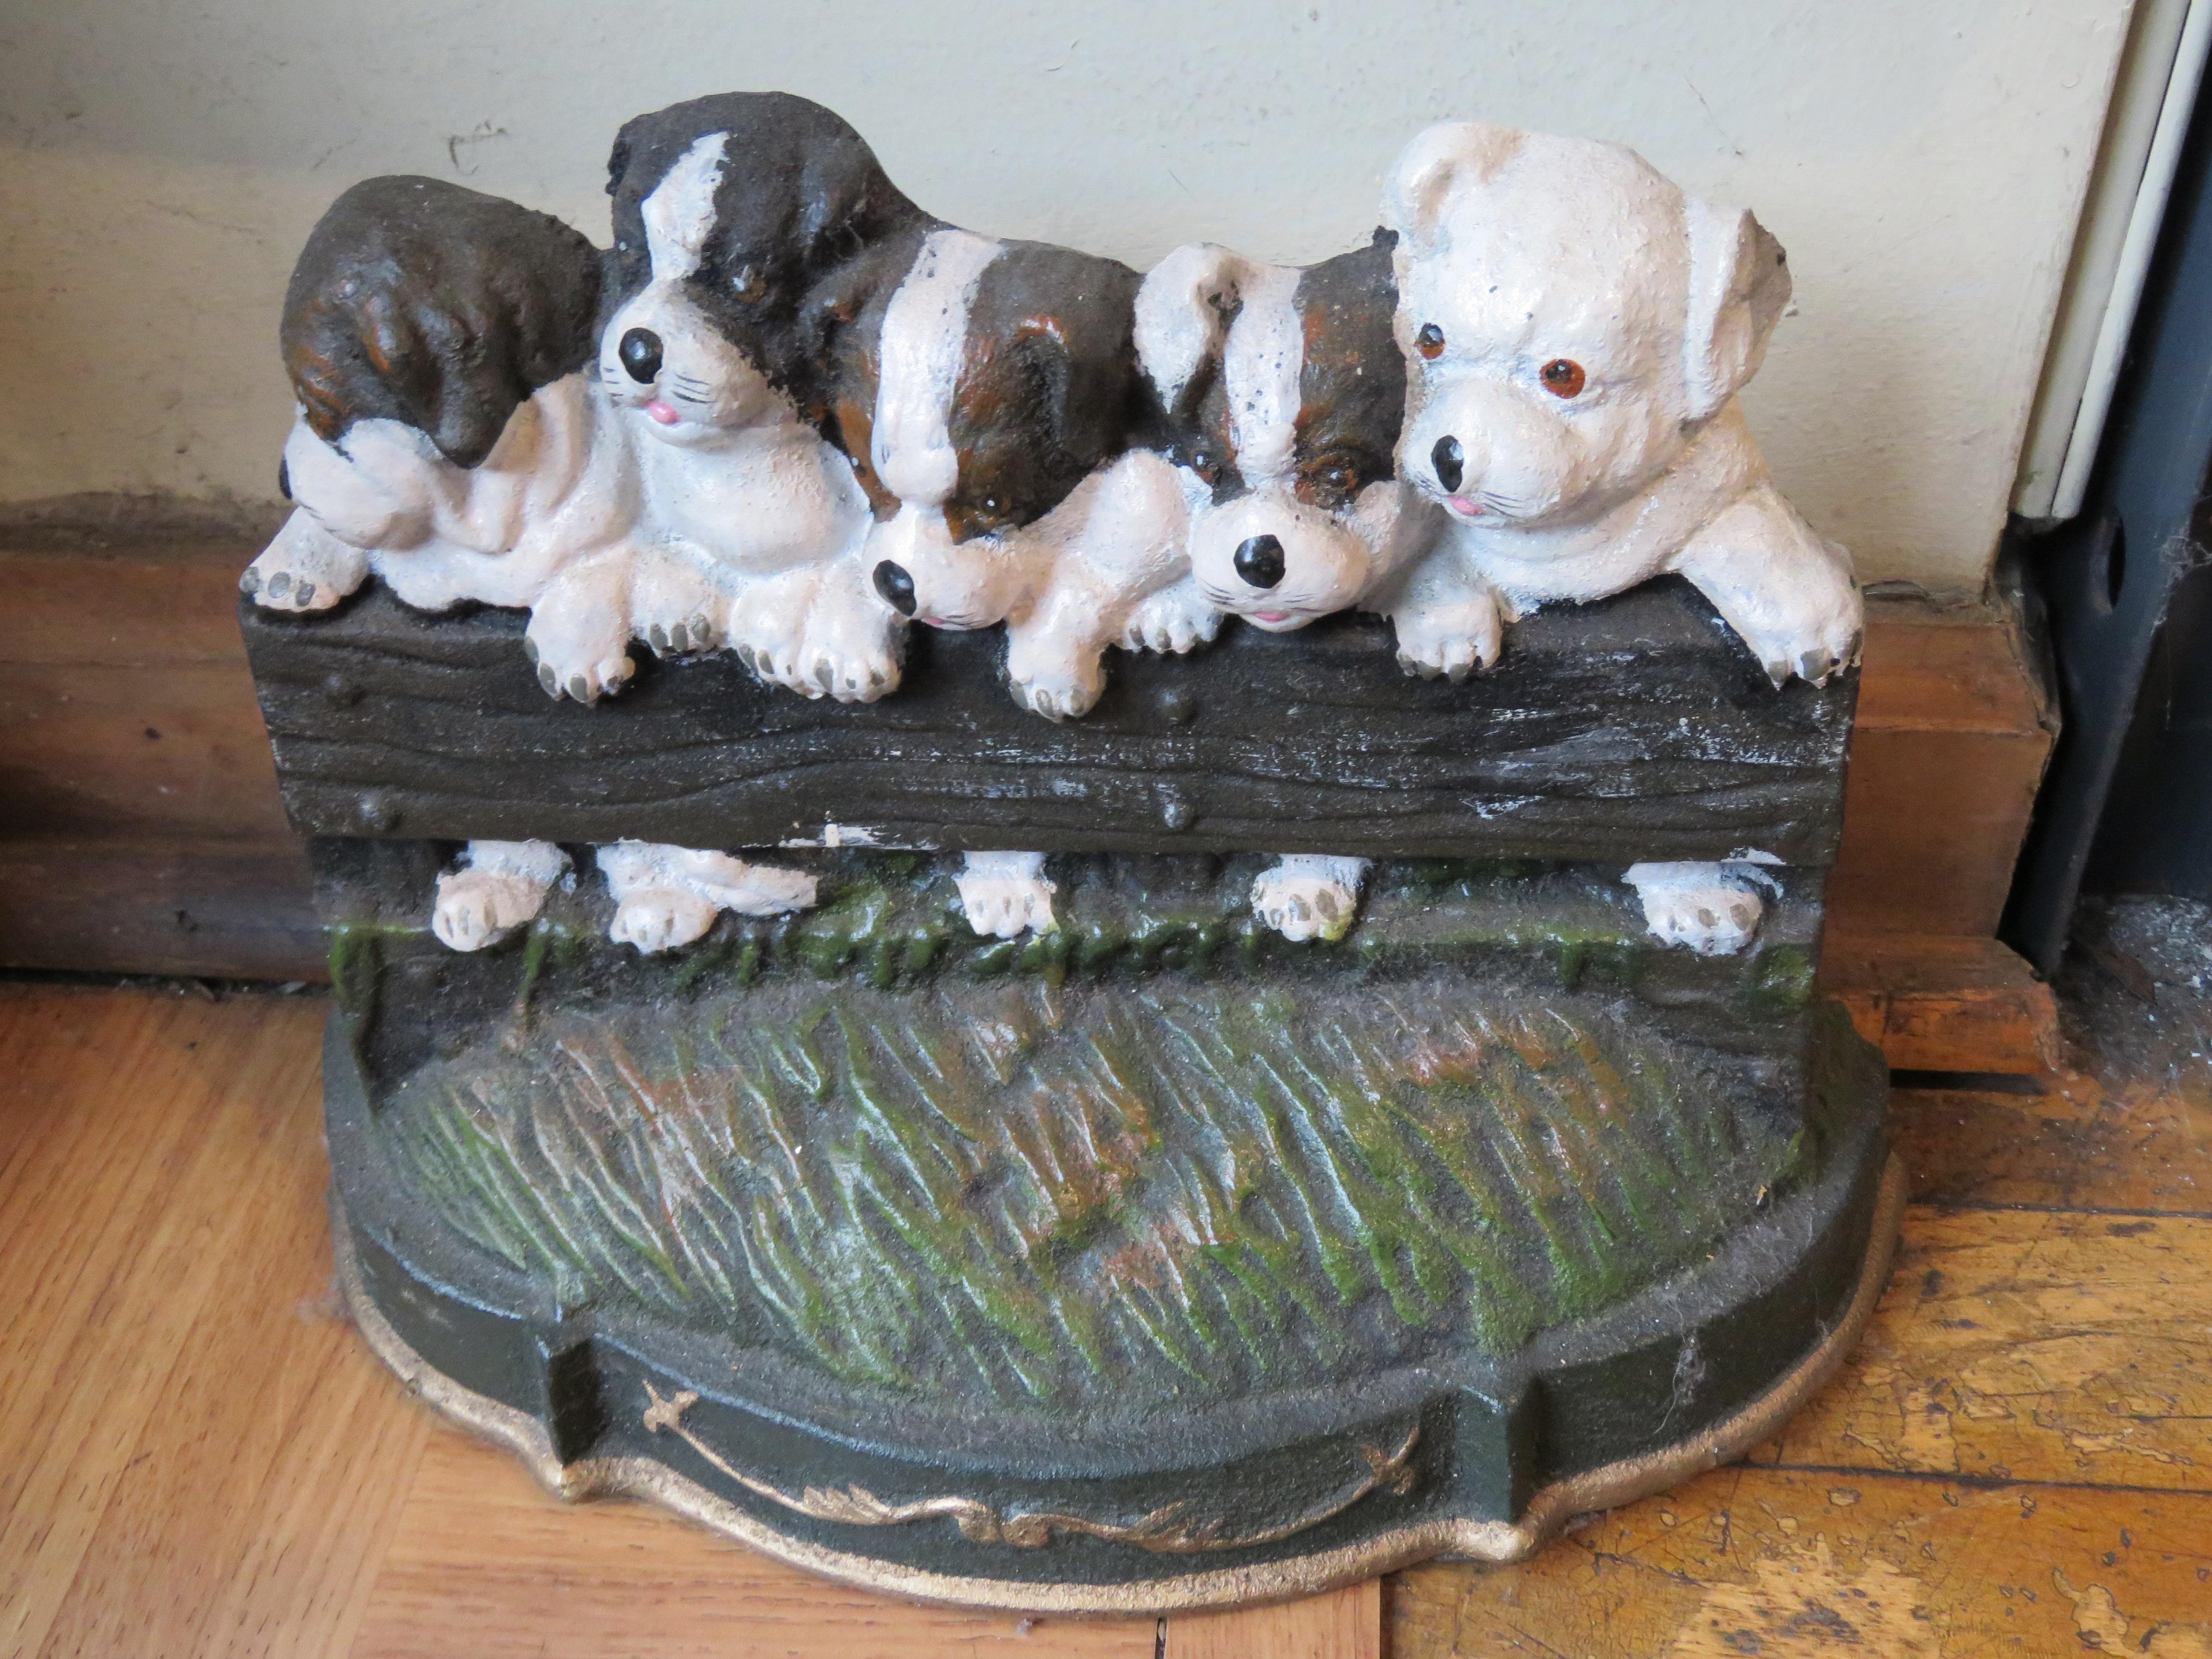 An Exquisite and Beautiful Quality Large Cast Iron Heavy Sculpted Handpainted Group of Dogs. Taken from an Important New York City Sutton Place, New York City Estate Collection. A Real Beauty!

Measurements: 12